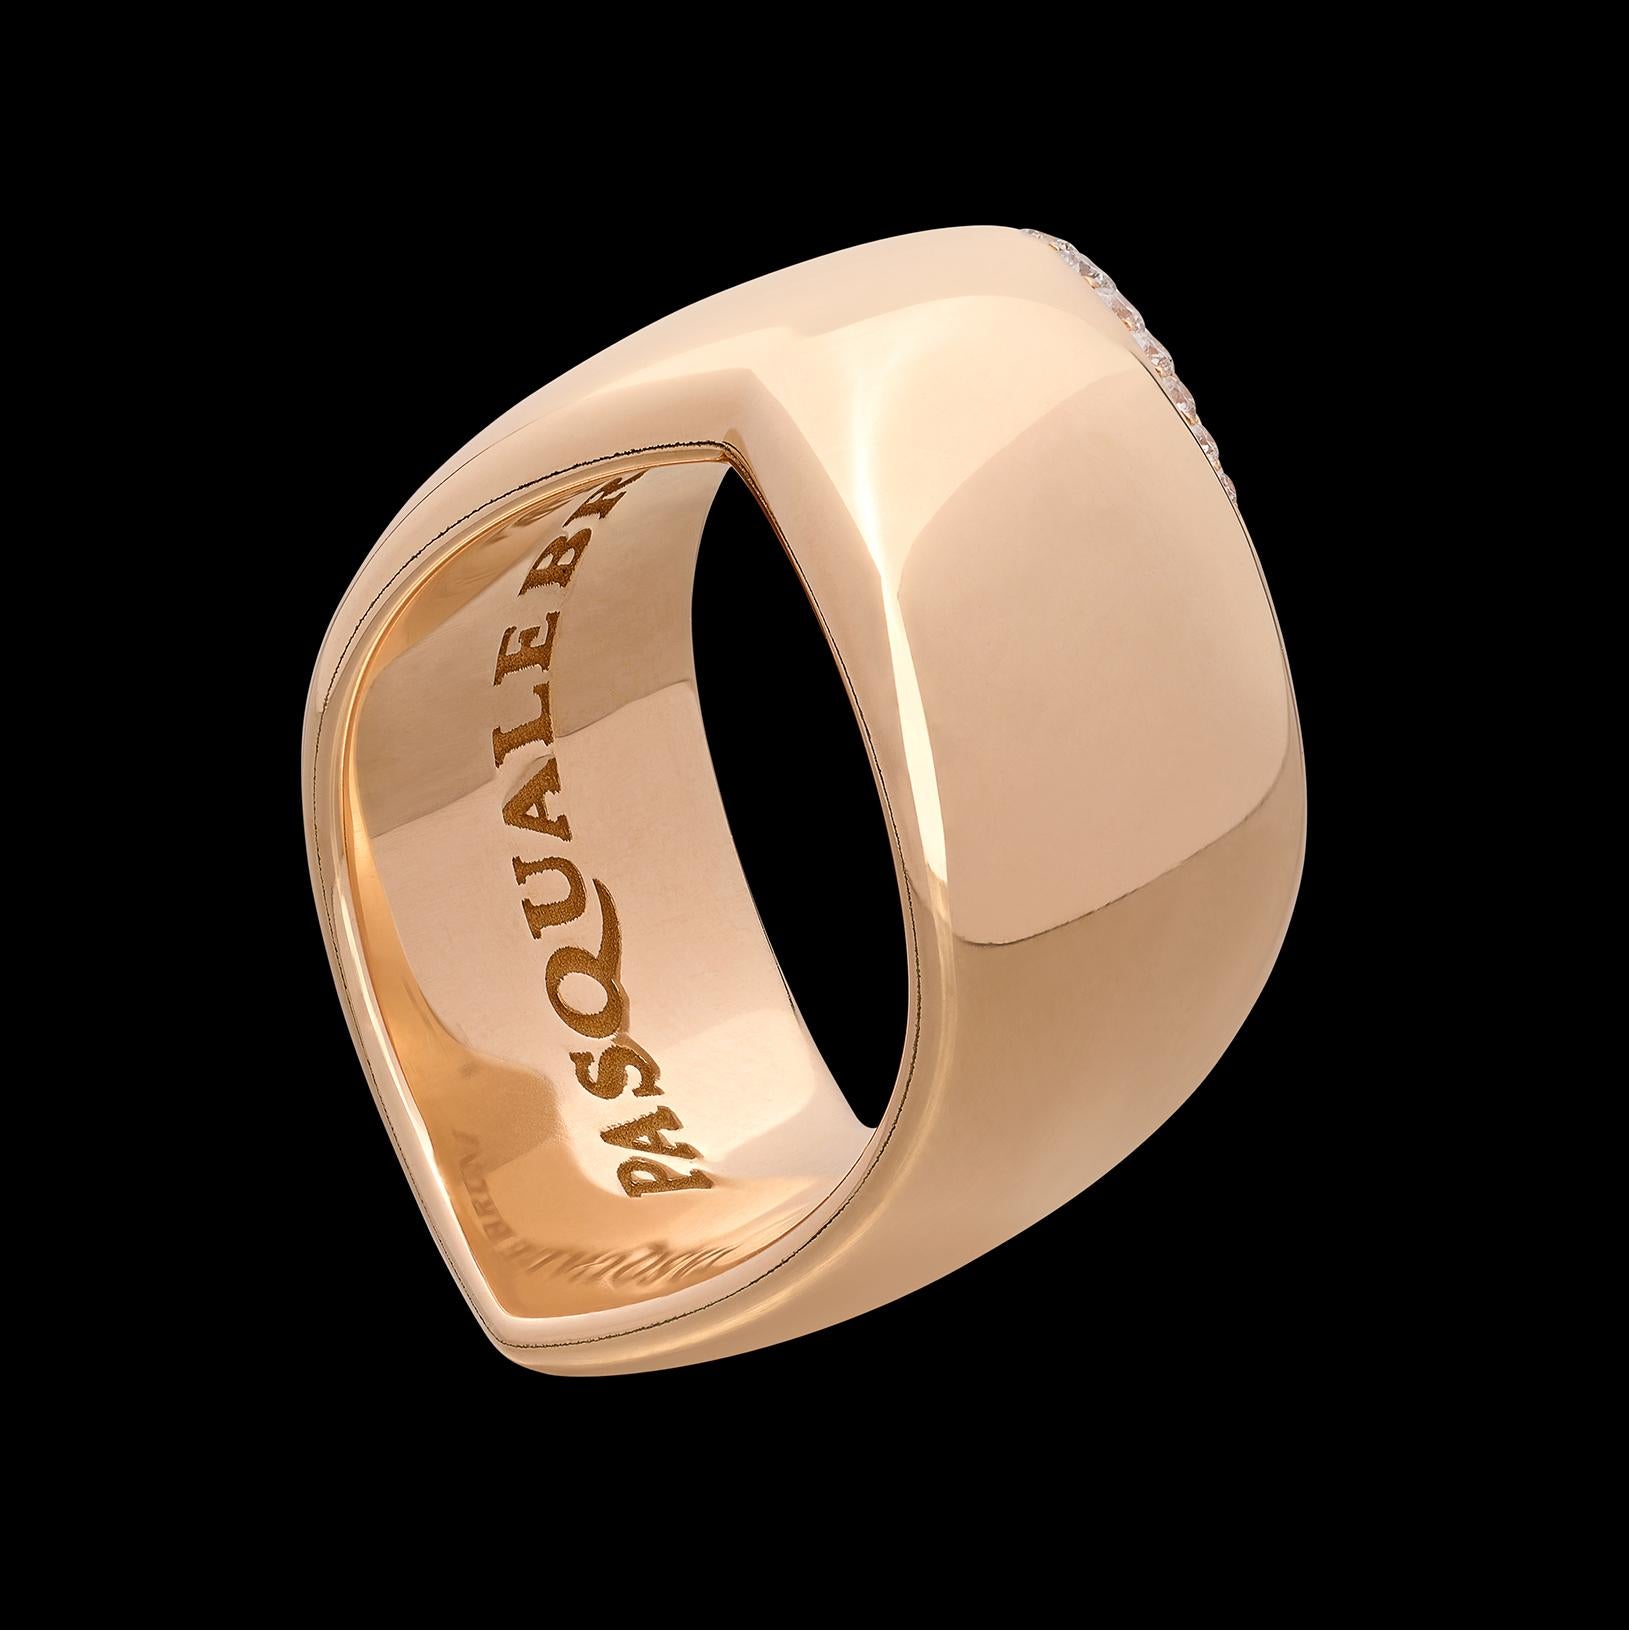 Pasquale Bruni Diamond & 18k Rose Gold Ring, Italy For Sale 1